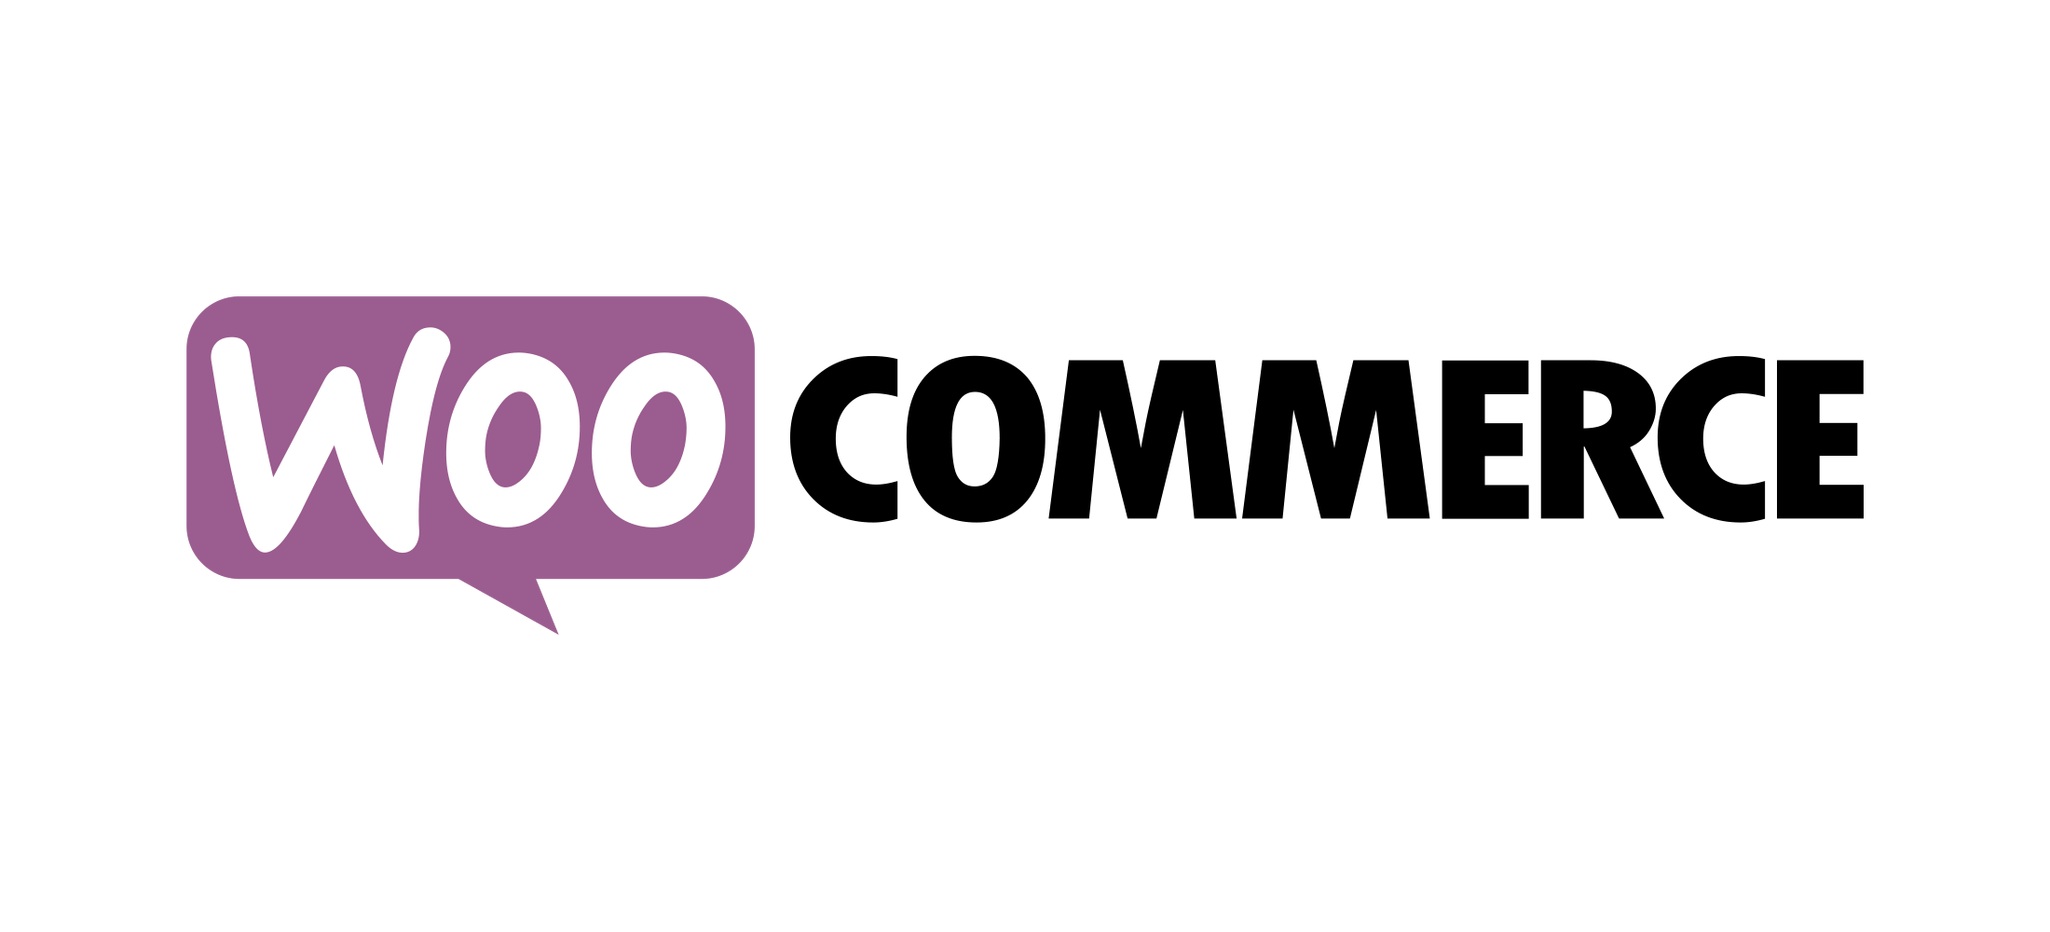 WooCommerce Retires Canvas Theme, Recommends Customers Migrate to Storefront Theme